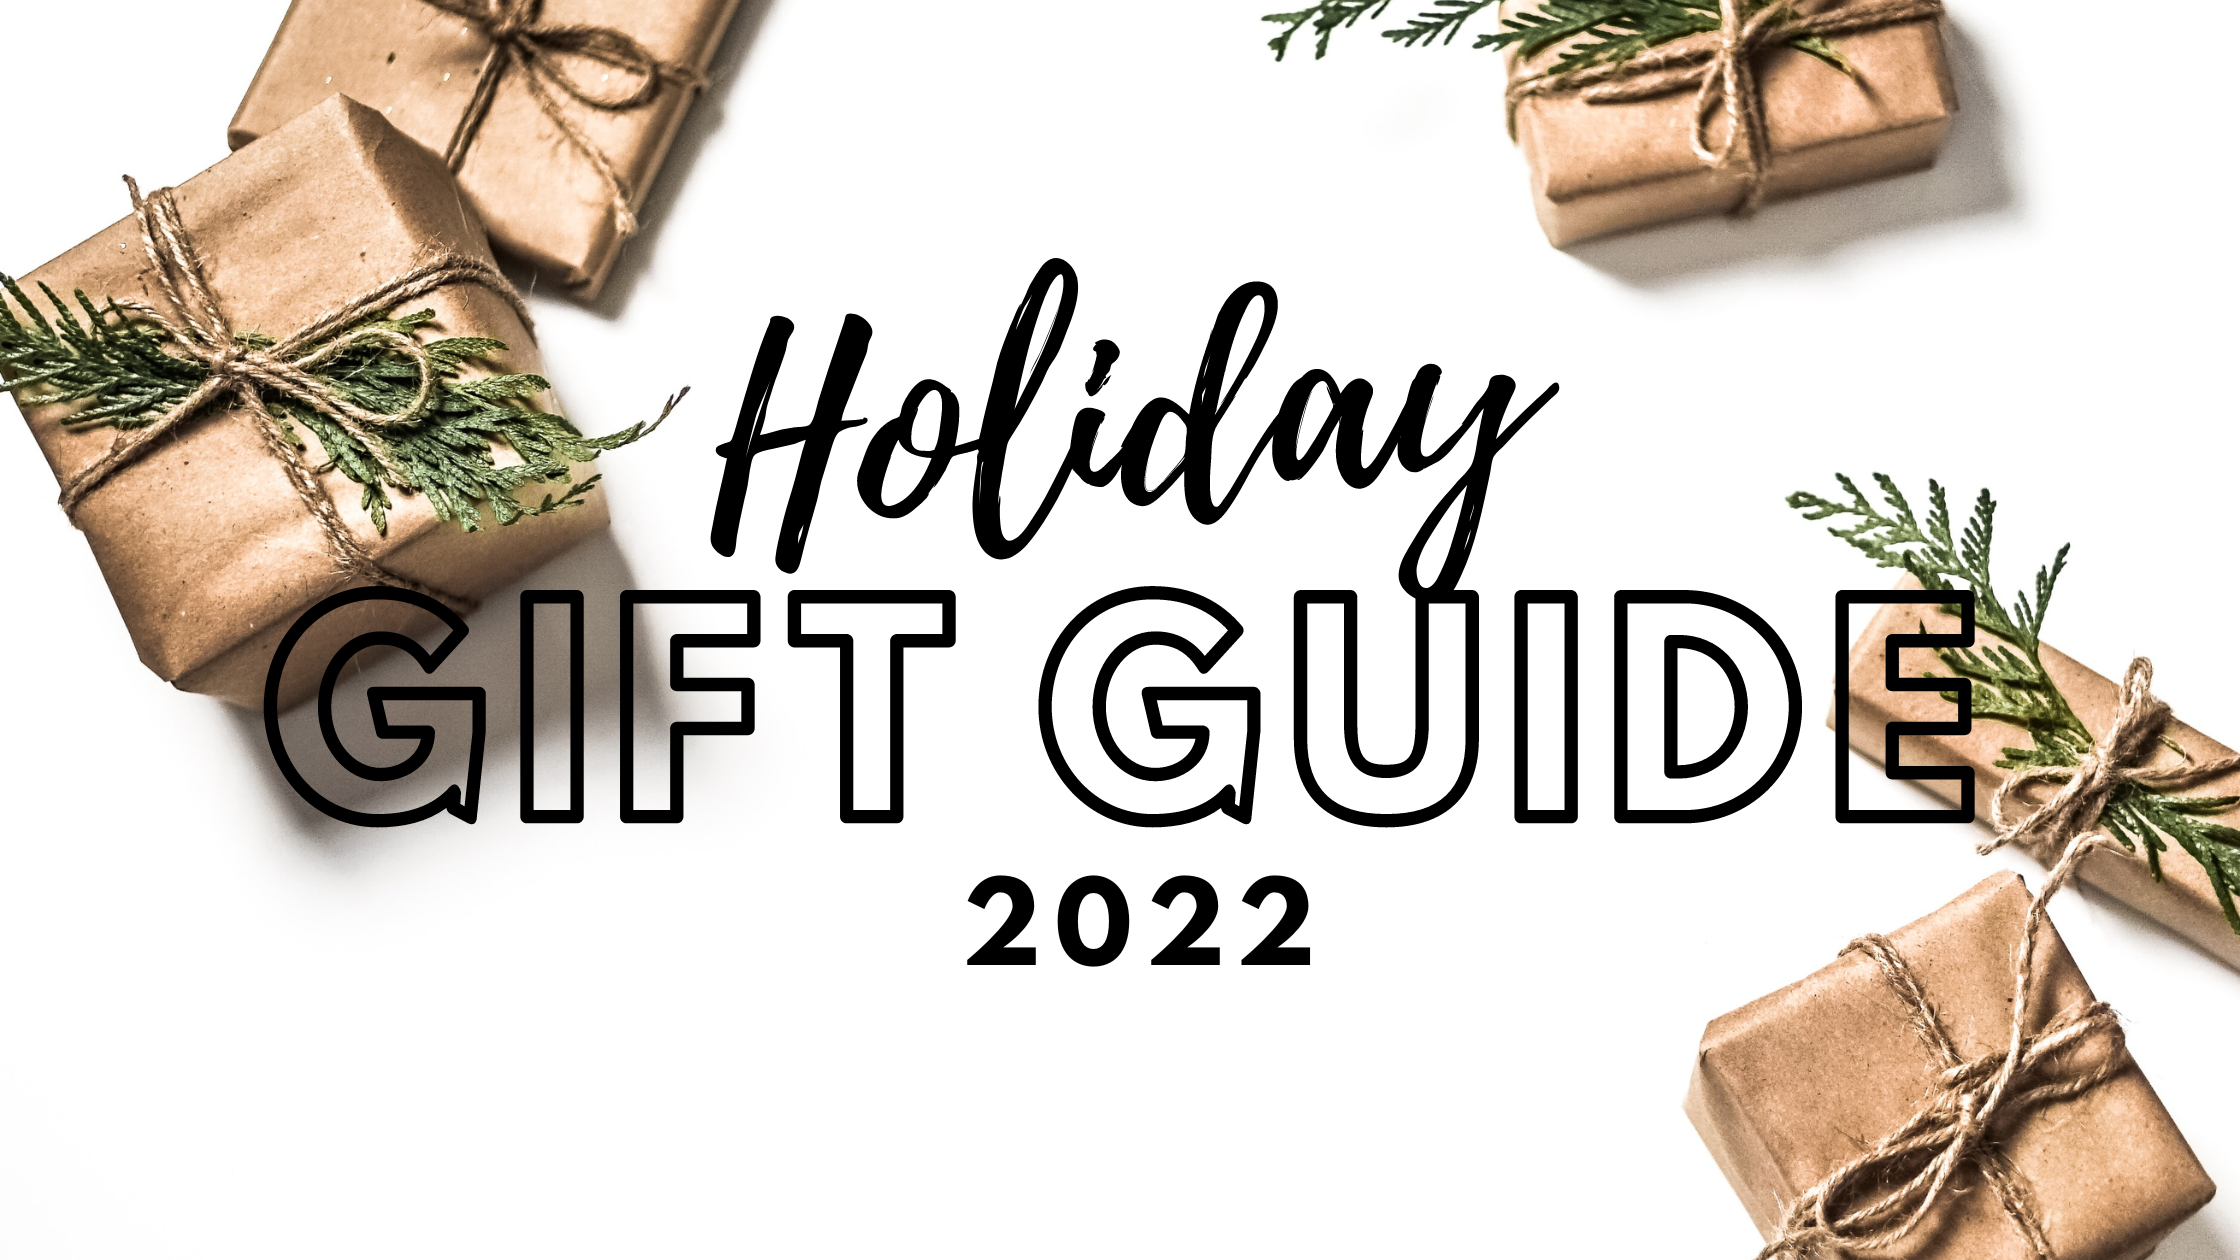 2022 holiday gift guide (for adults) - stocking stuffers, kitchen